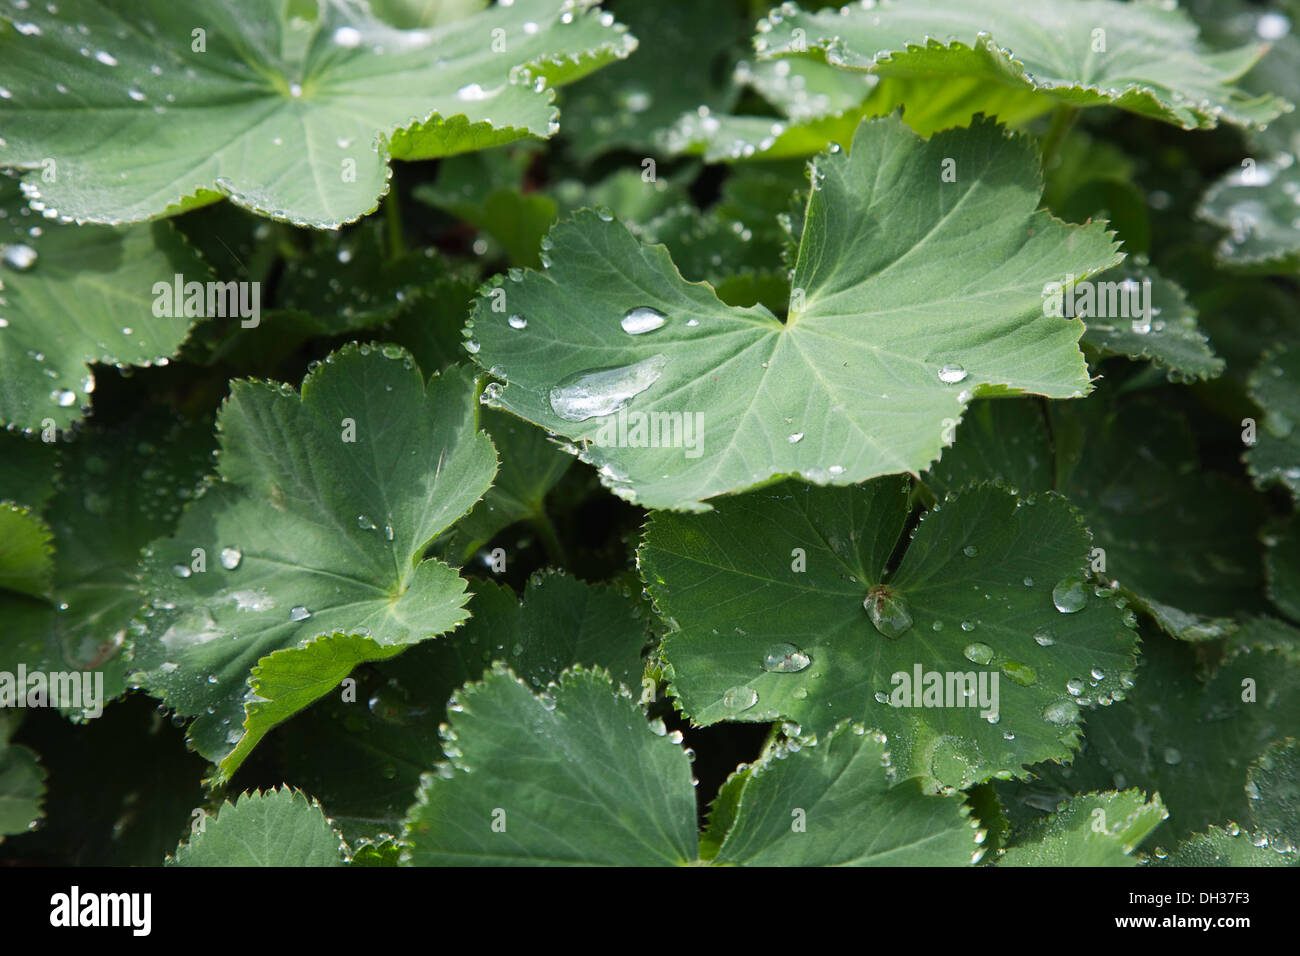 Ladys mantle, Alchemilla mollis with rain drops collecting on leaves. Stock Photo